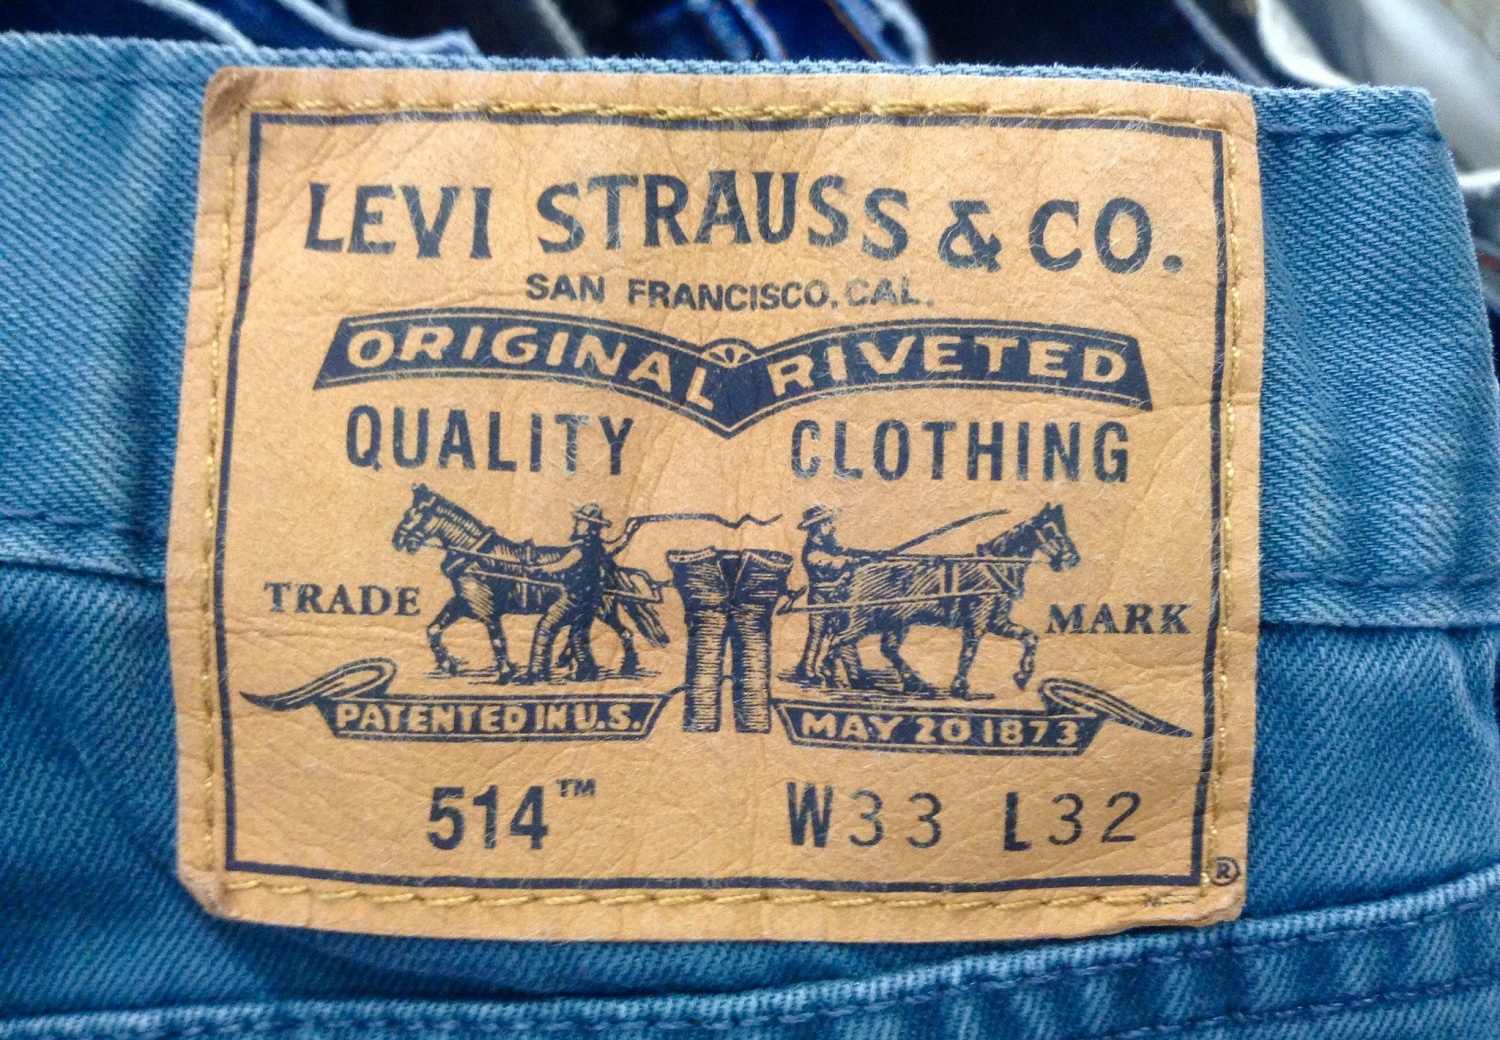 Vintage Levis Jeans First Bought In 